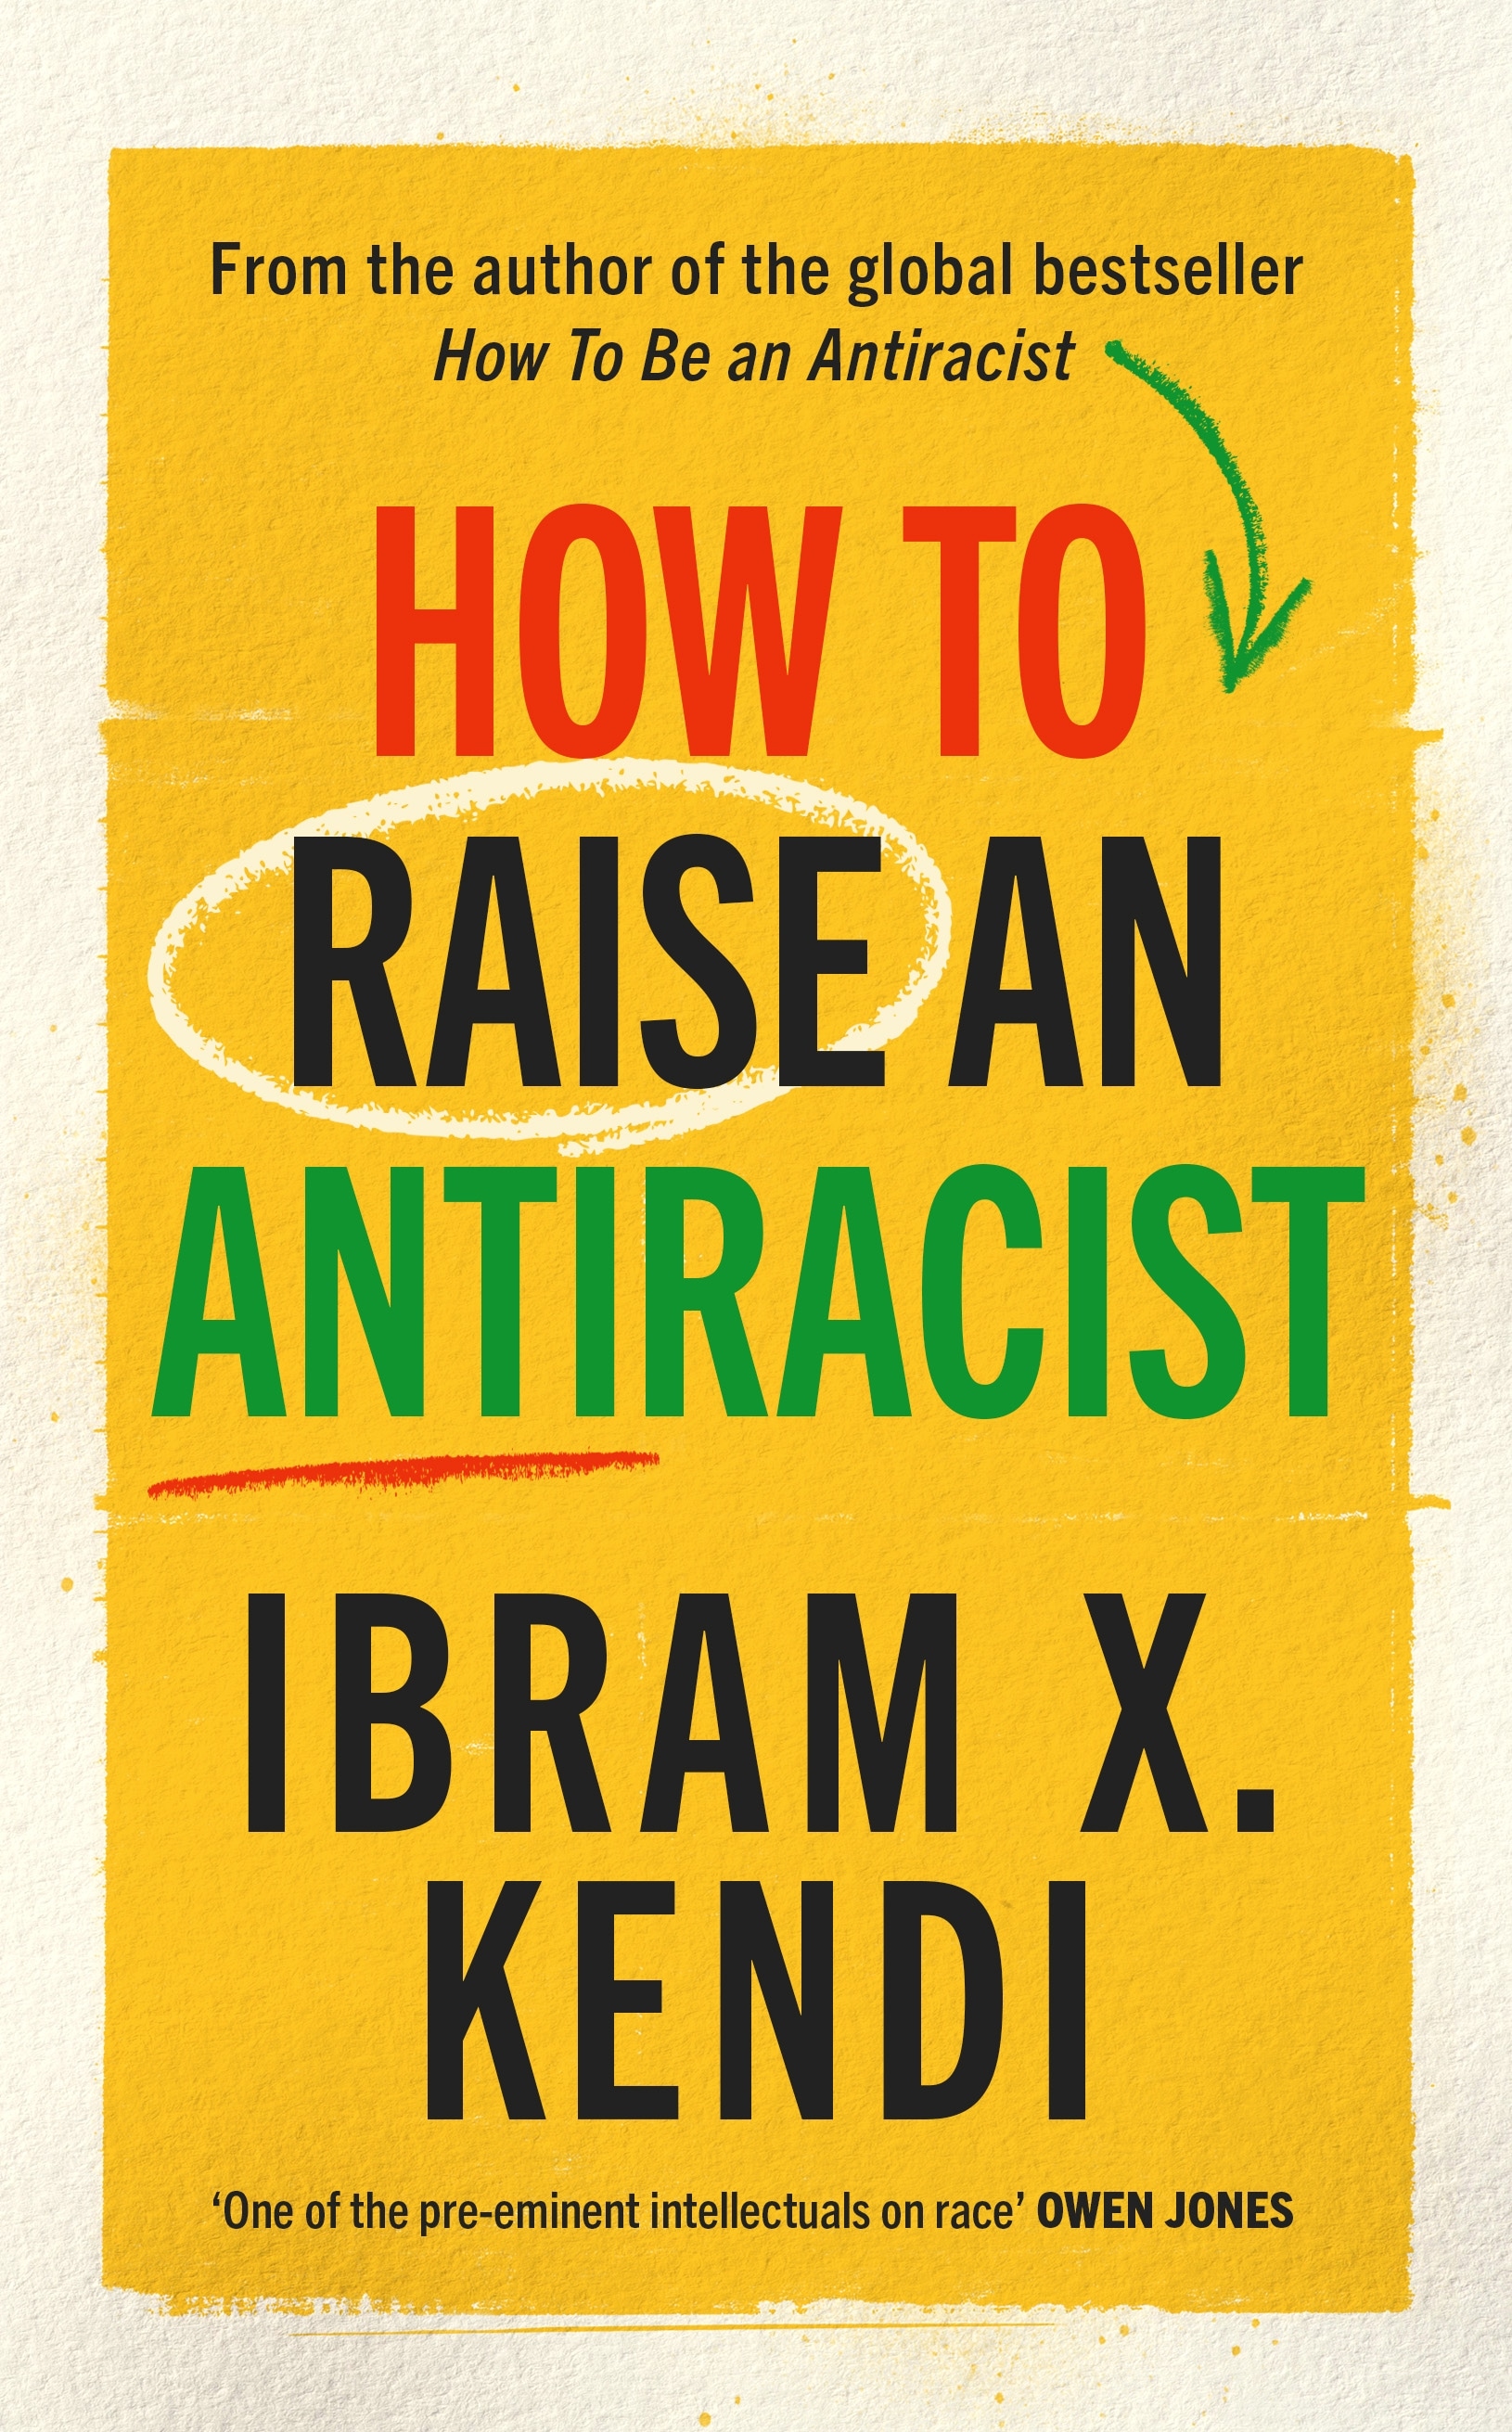 Book “How To Raise an Antiracist” by Ibram X. Kendi — July 7, 2022